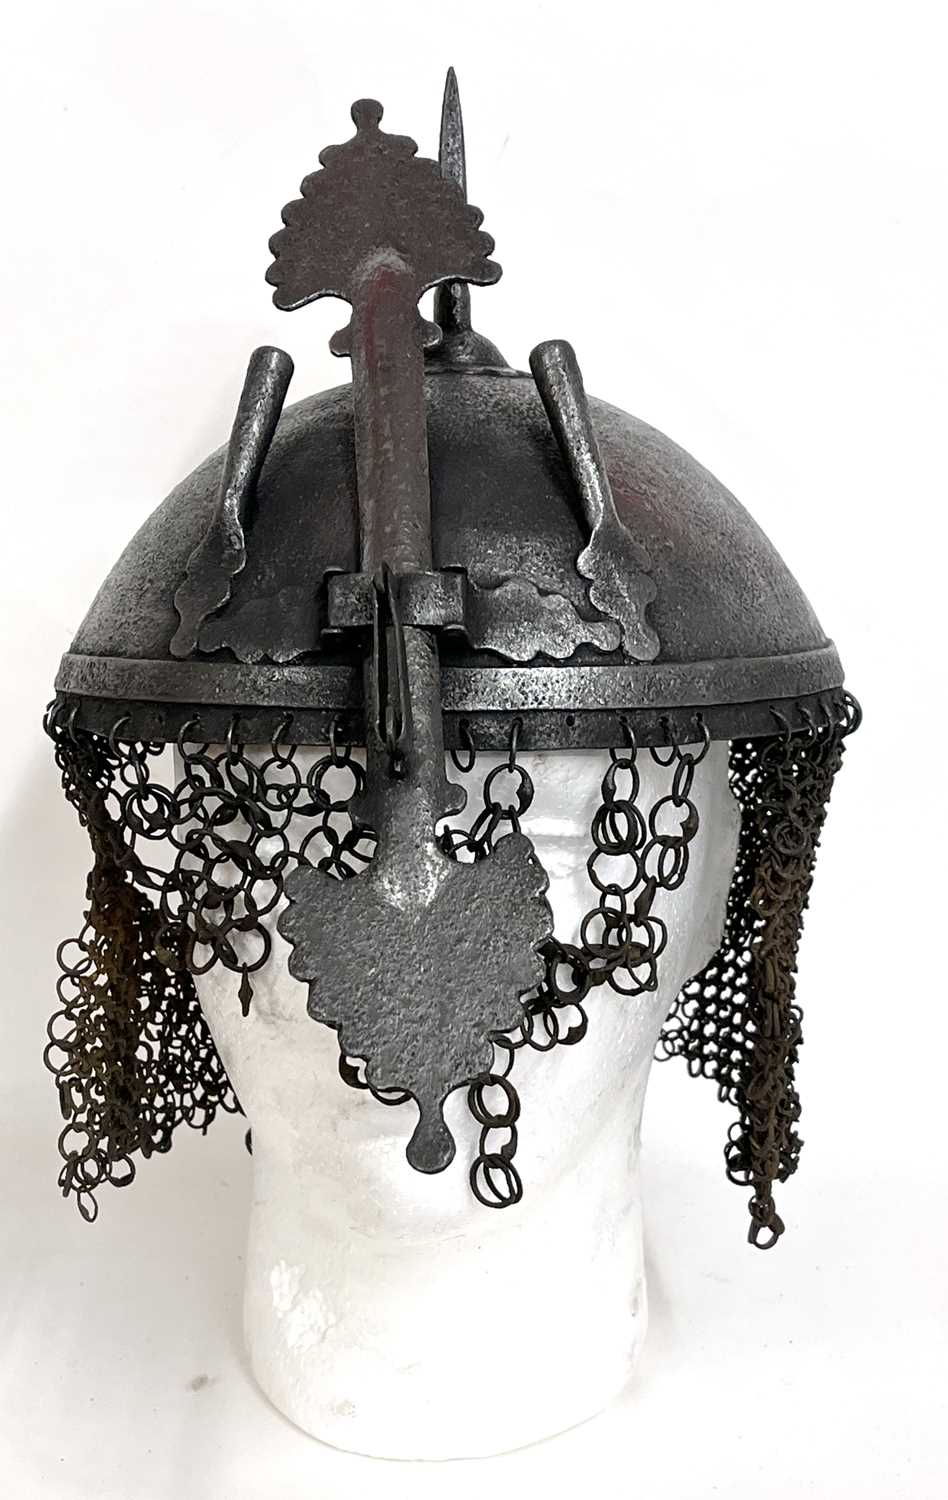 Late 19th Century Indo-Persian Kula - Khud helmet with a sliding nasal bar, twin plume sockets and - Image 2 of 10